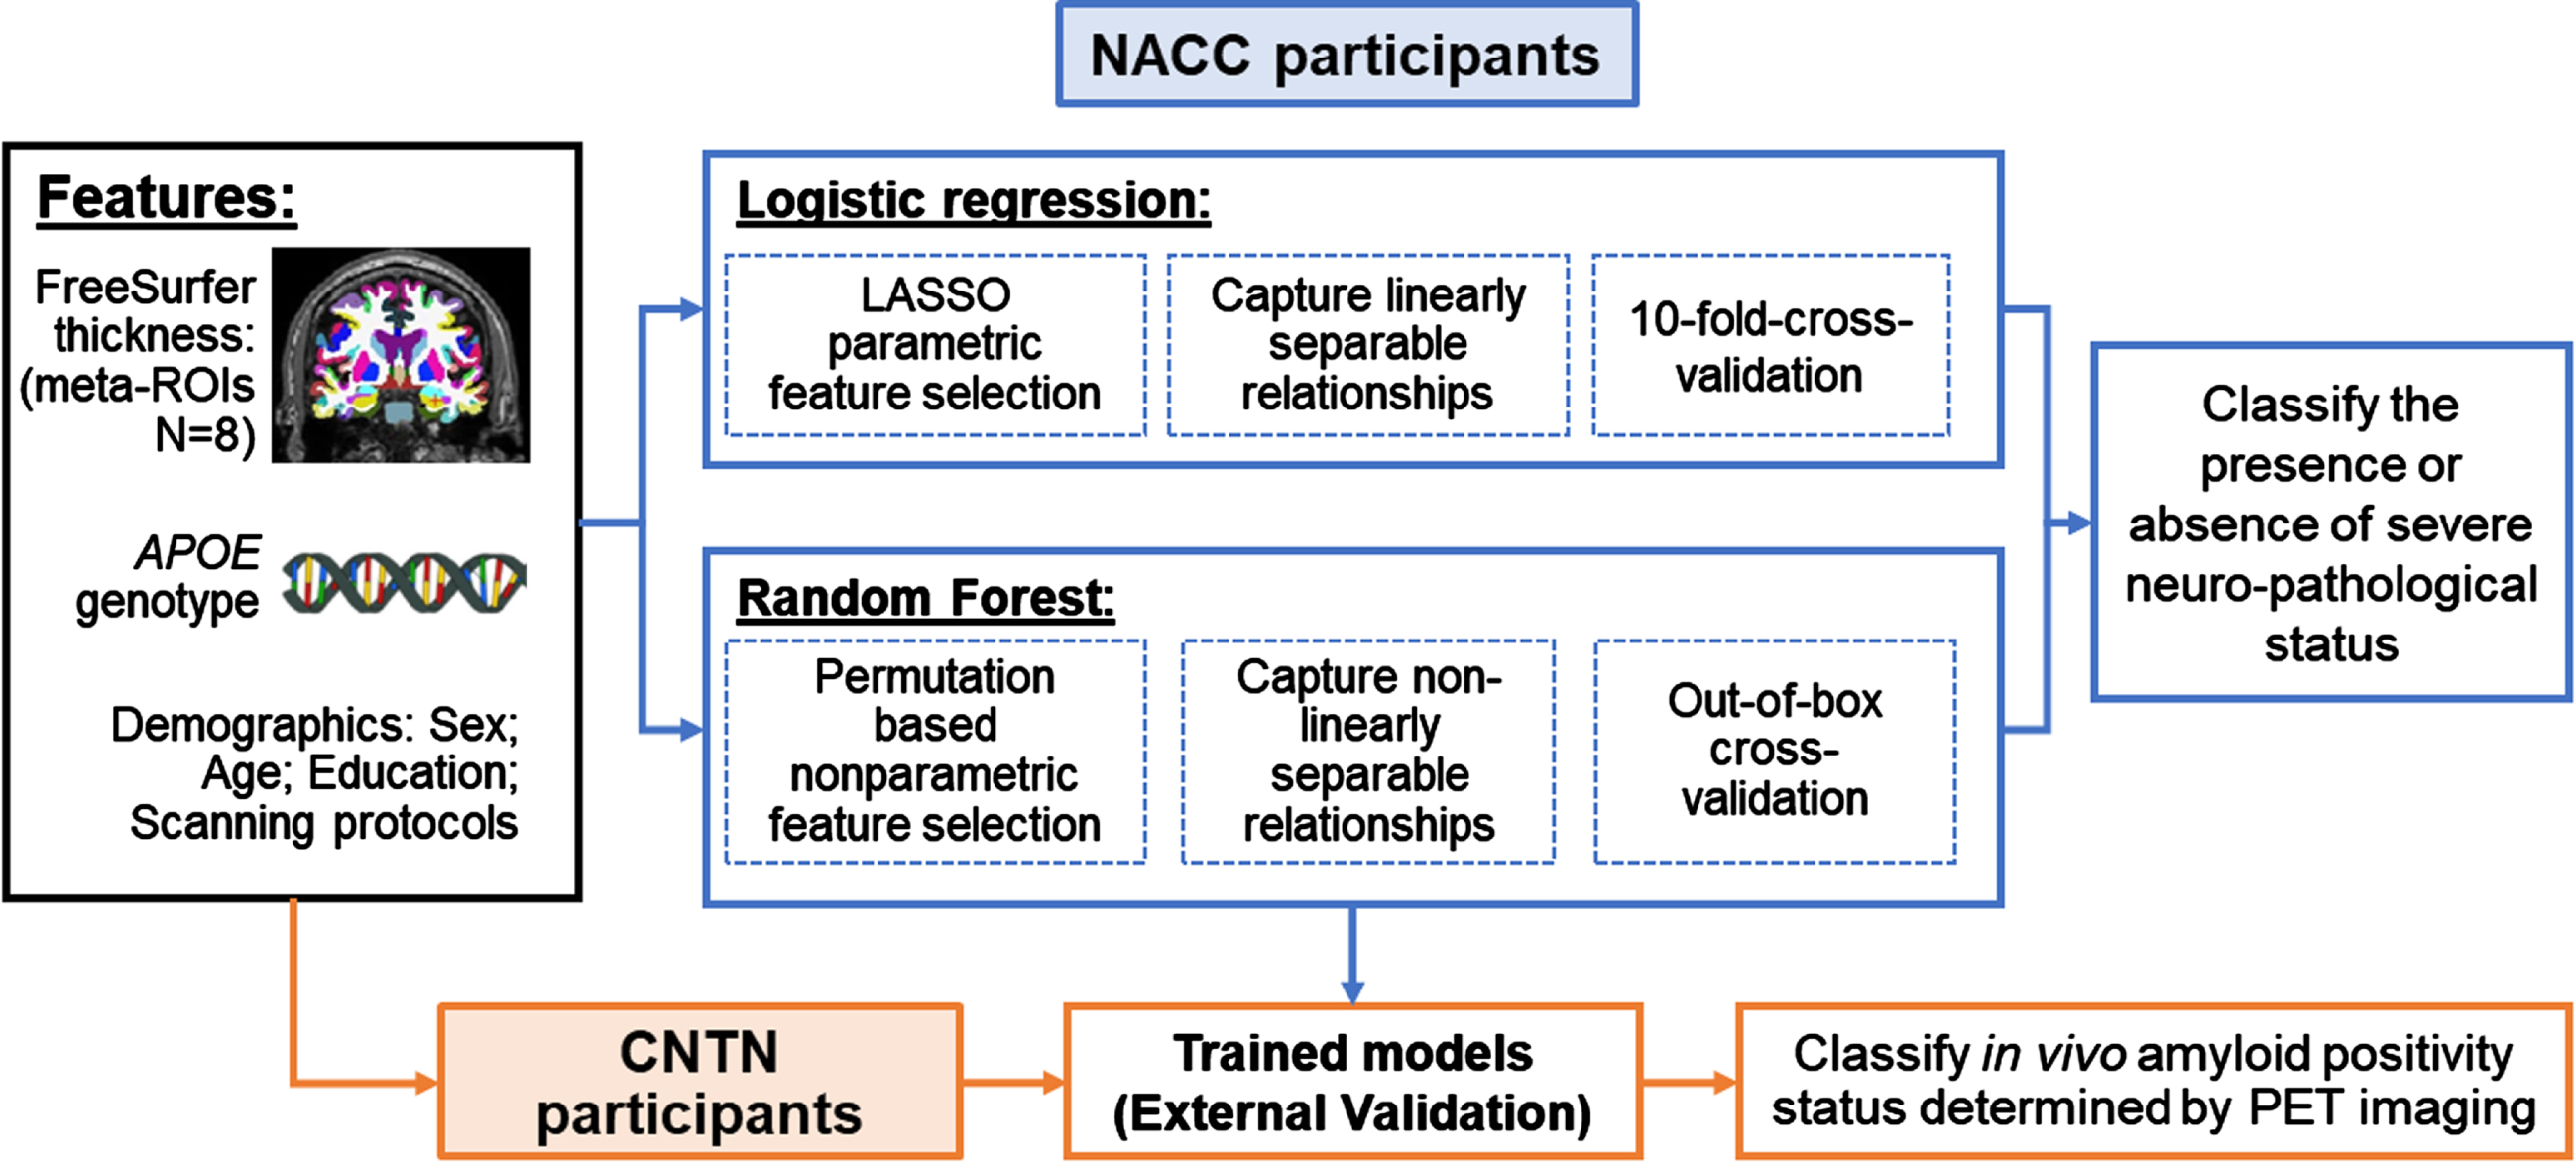 Classification schema. Black box (on the left): Clinically accessible features included in this study; Blue boxes (top part on the right): training and validating machine learning models in classifying the presence or absence of severe AD neuropathological status in NACC participants; Orange boxes (bottom part): External validation of trained models in classifying in vivo amyloid positivity status determined by PET imaging using CNTN subjects.